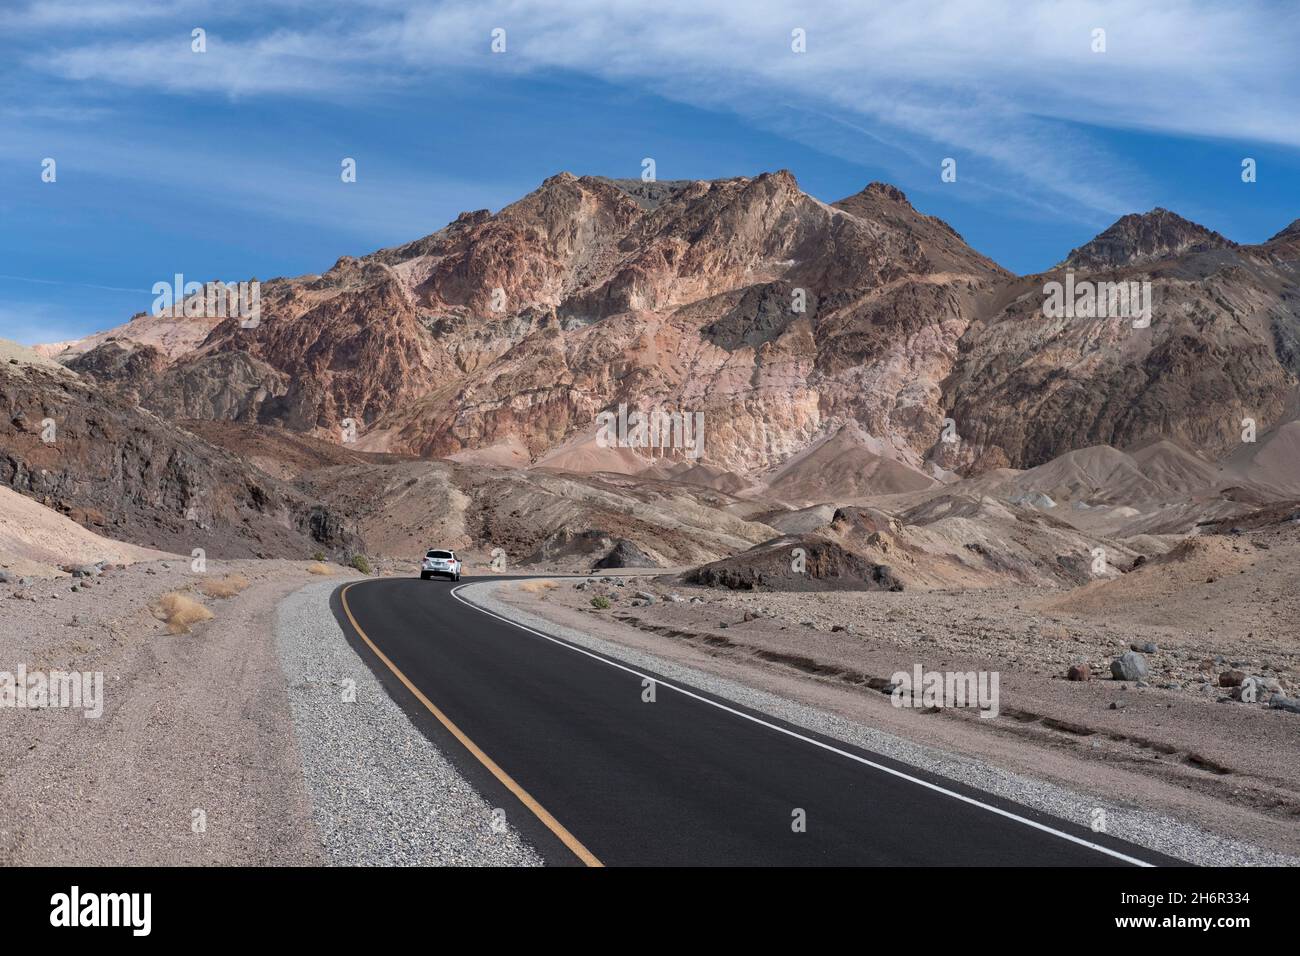 Road leading to the colorful geology of the Artist Palette rock formation in Death Valley National Park Stock Photo